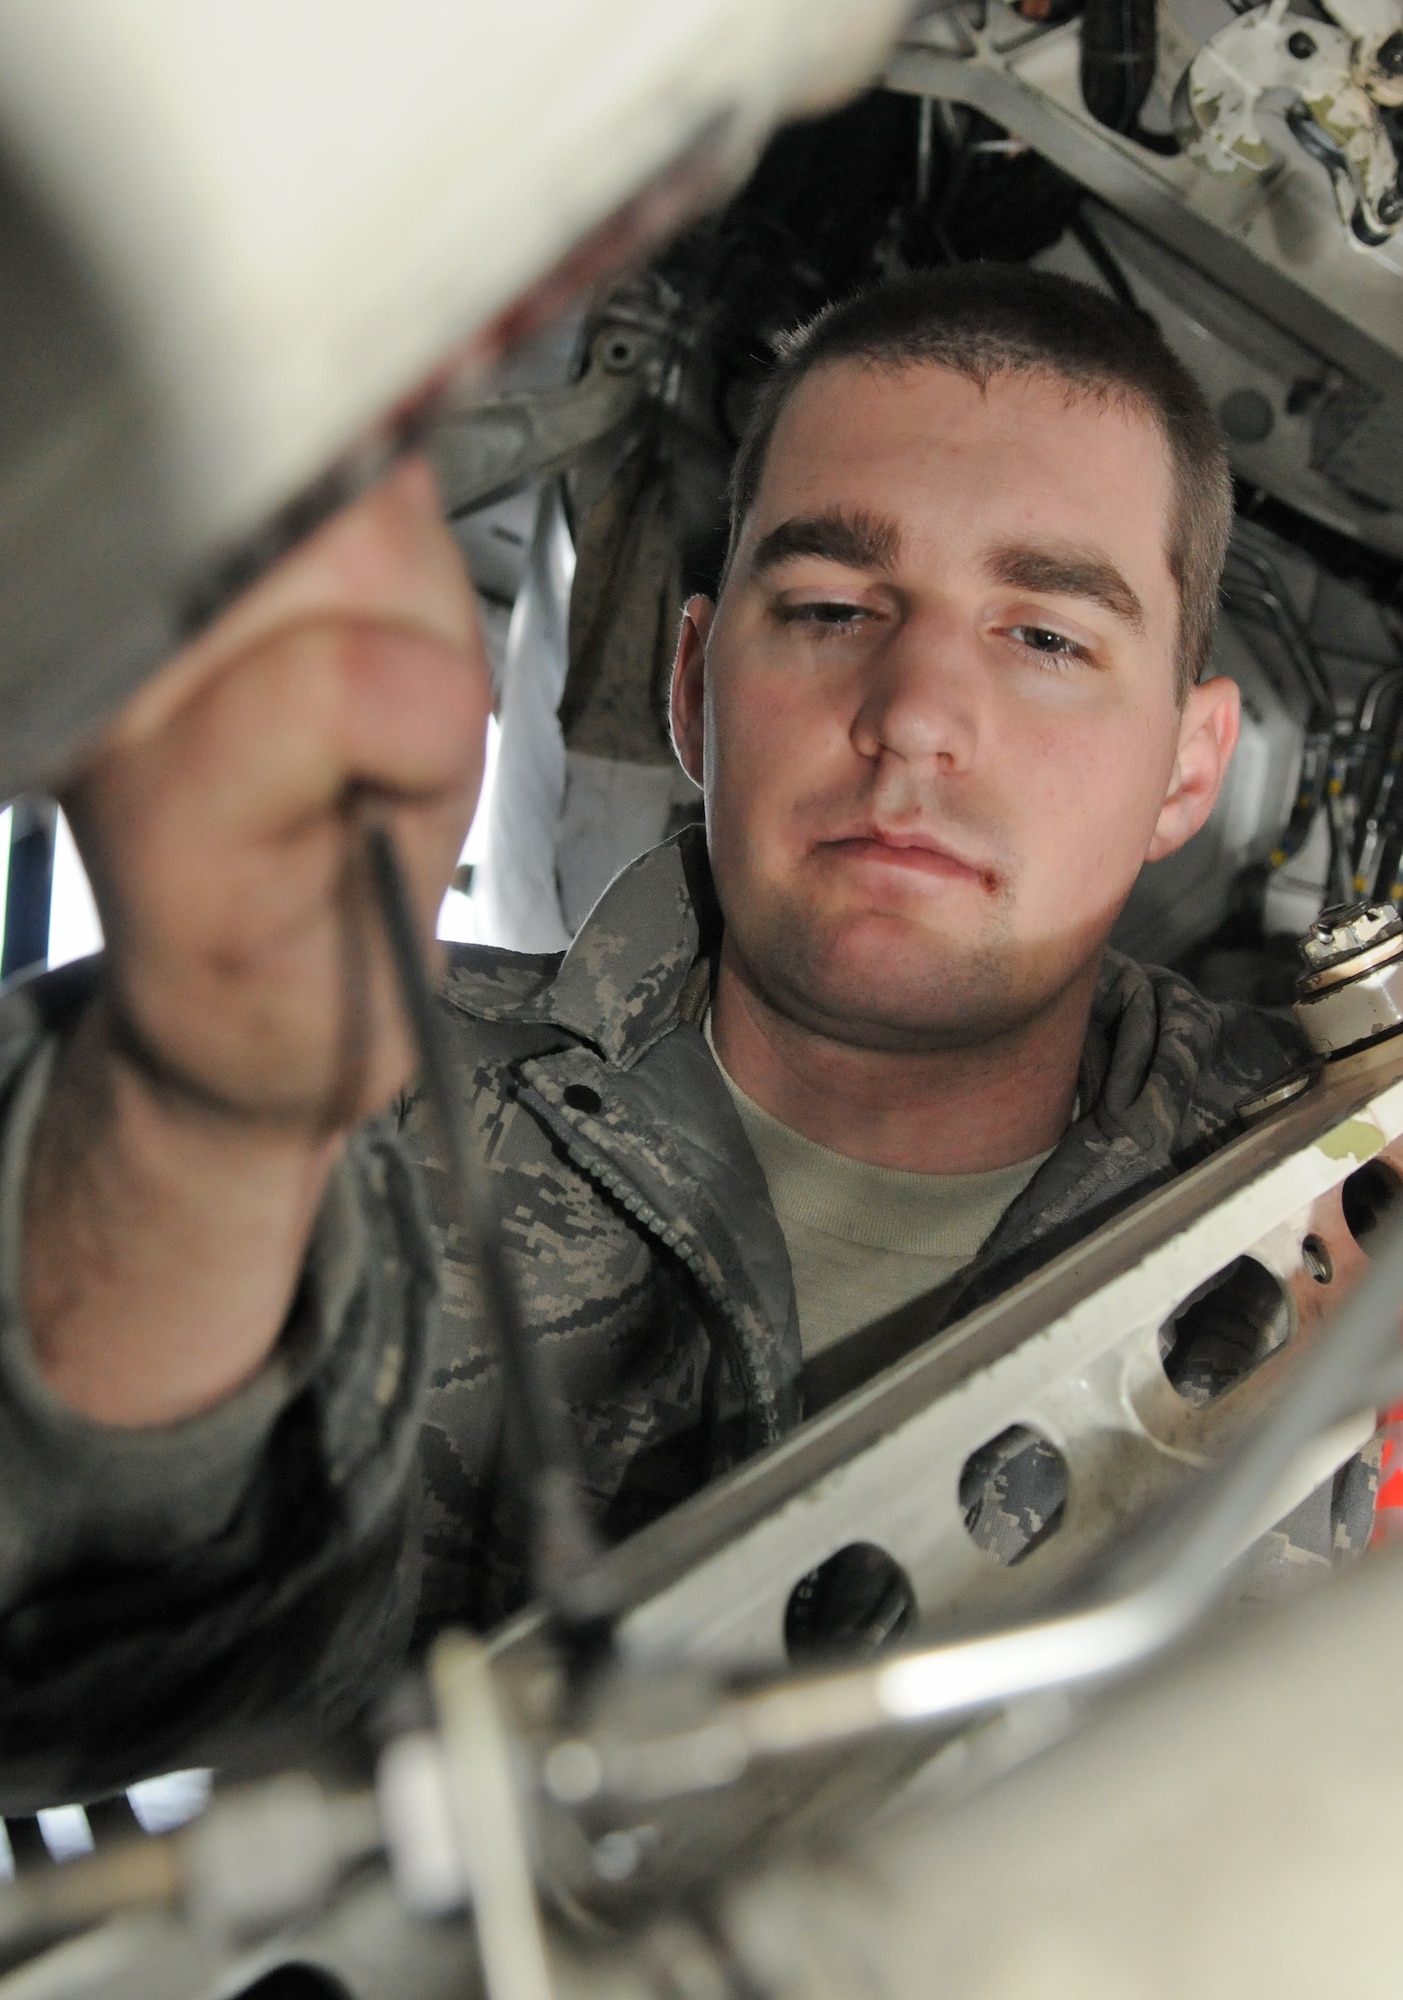 SPANGDAHLEM AIR BASE, Germany – Staff Sgt. Ryan Merrill, 480th Aircraft Maintenance Unit dedicated crew chief, uses a wrench to remove a nut on an F-16 Fighting Falcon during a “cannibalization bird” process Dec. 30. The can-bird process is a maintenance process in which one aircraft is taken apart to supply mission capable parts that will be used by remaining aircraft in the fleet. (U.S. Air Force photo/Senior Airman Nick Wilson)